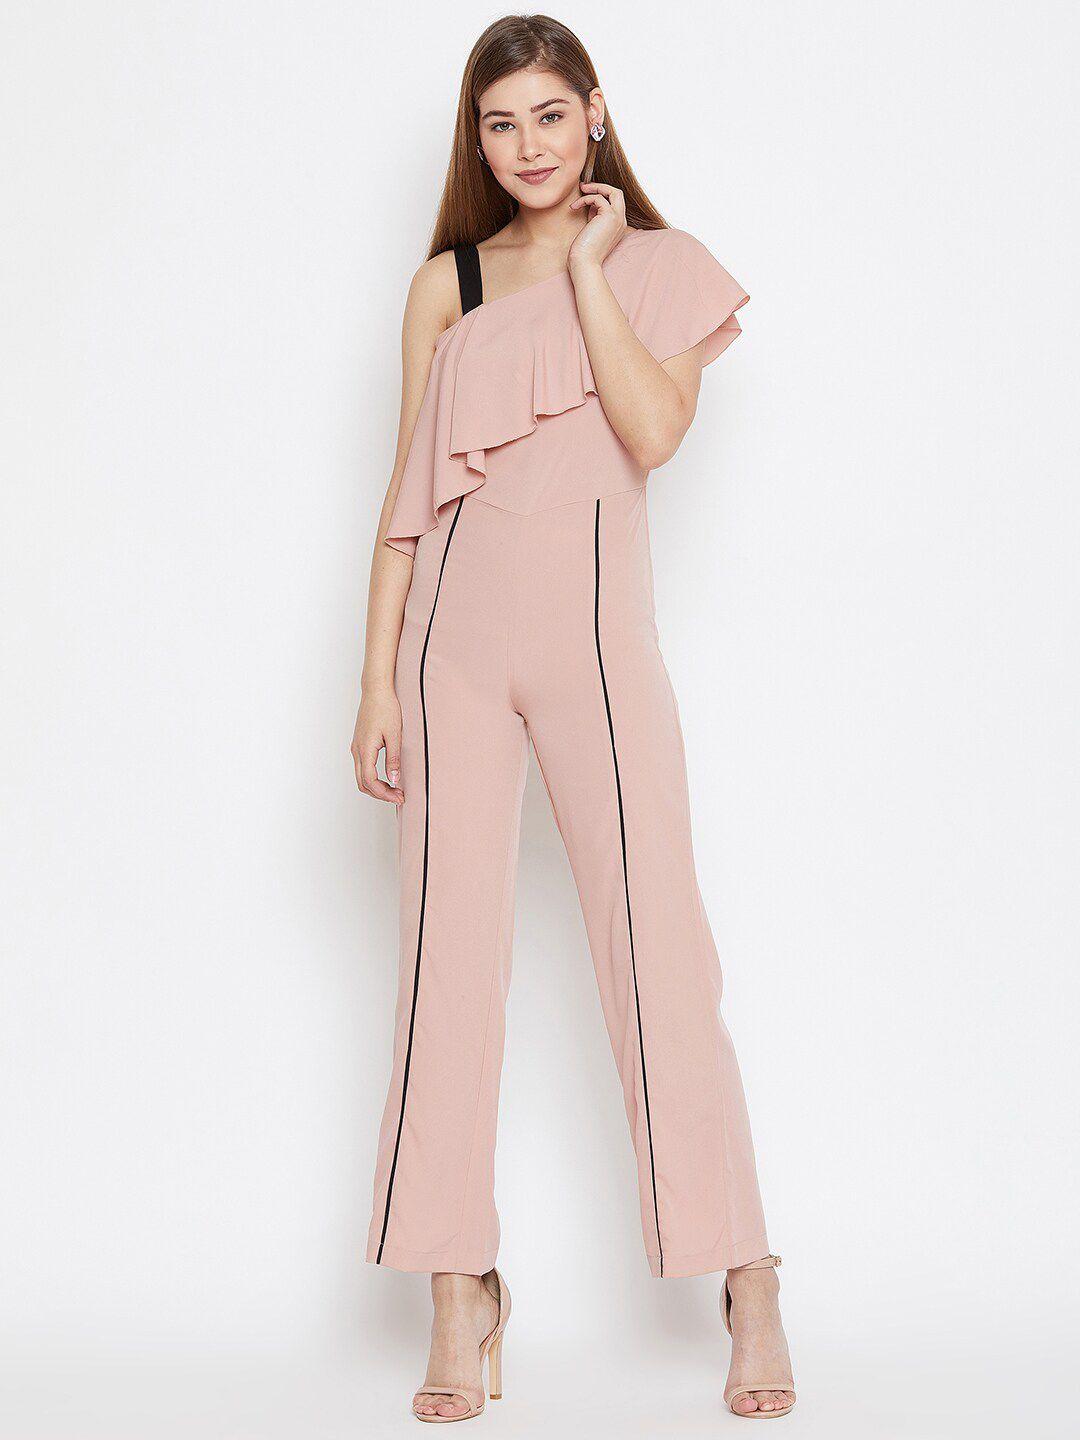 panit pink basic jumpsuit with ruffles